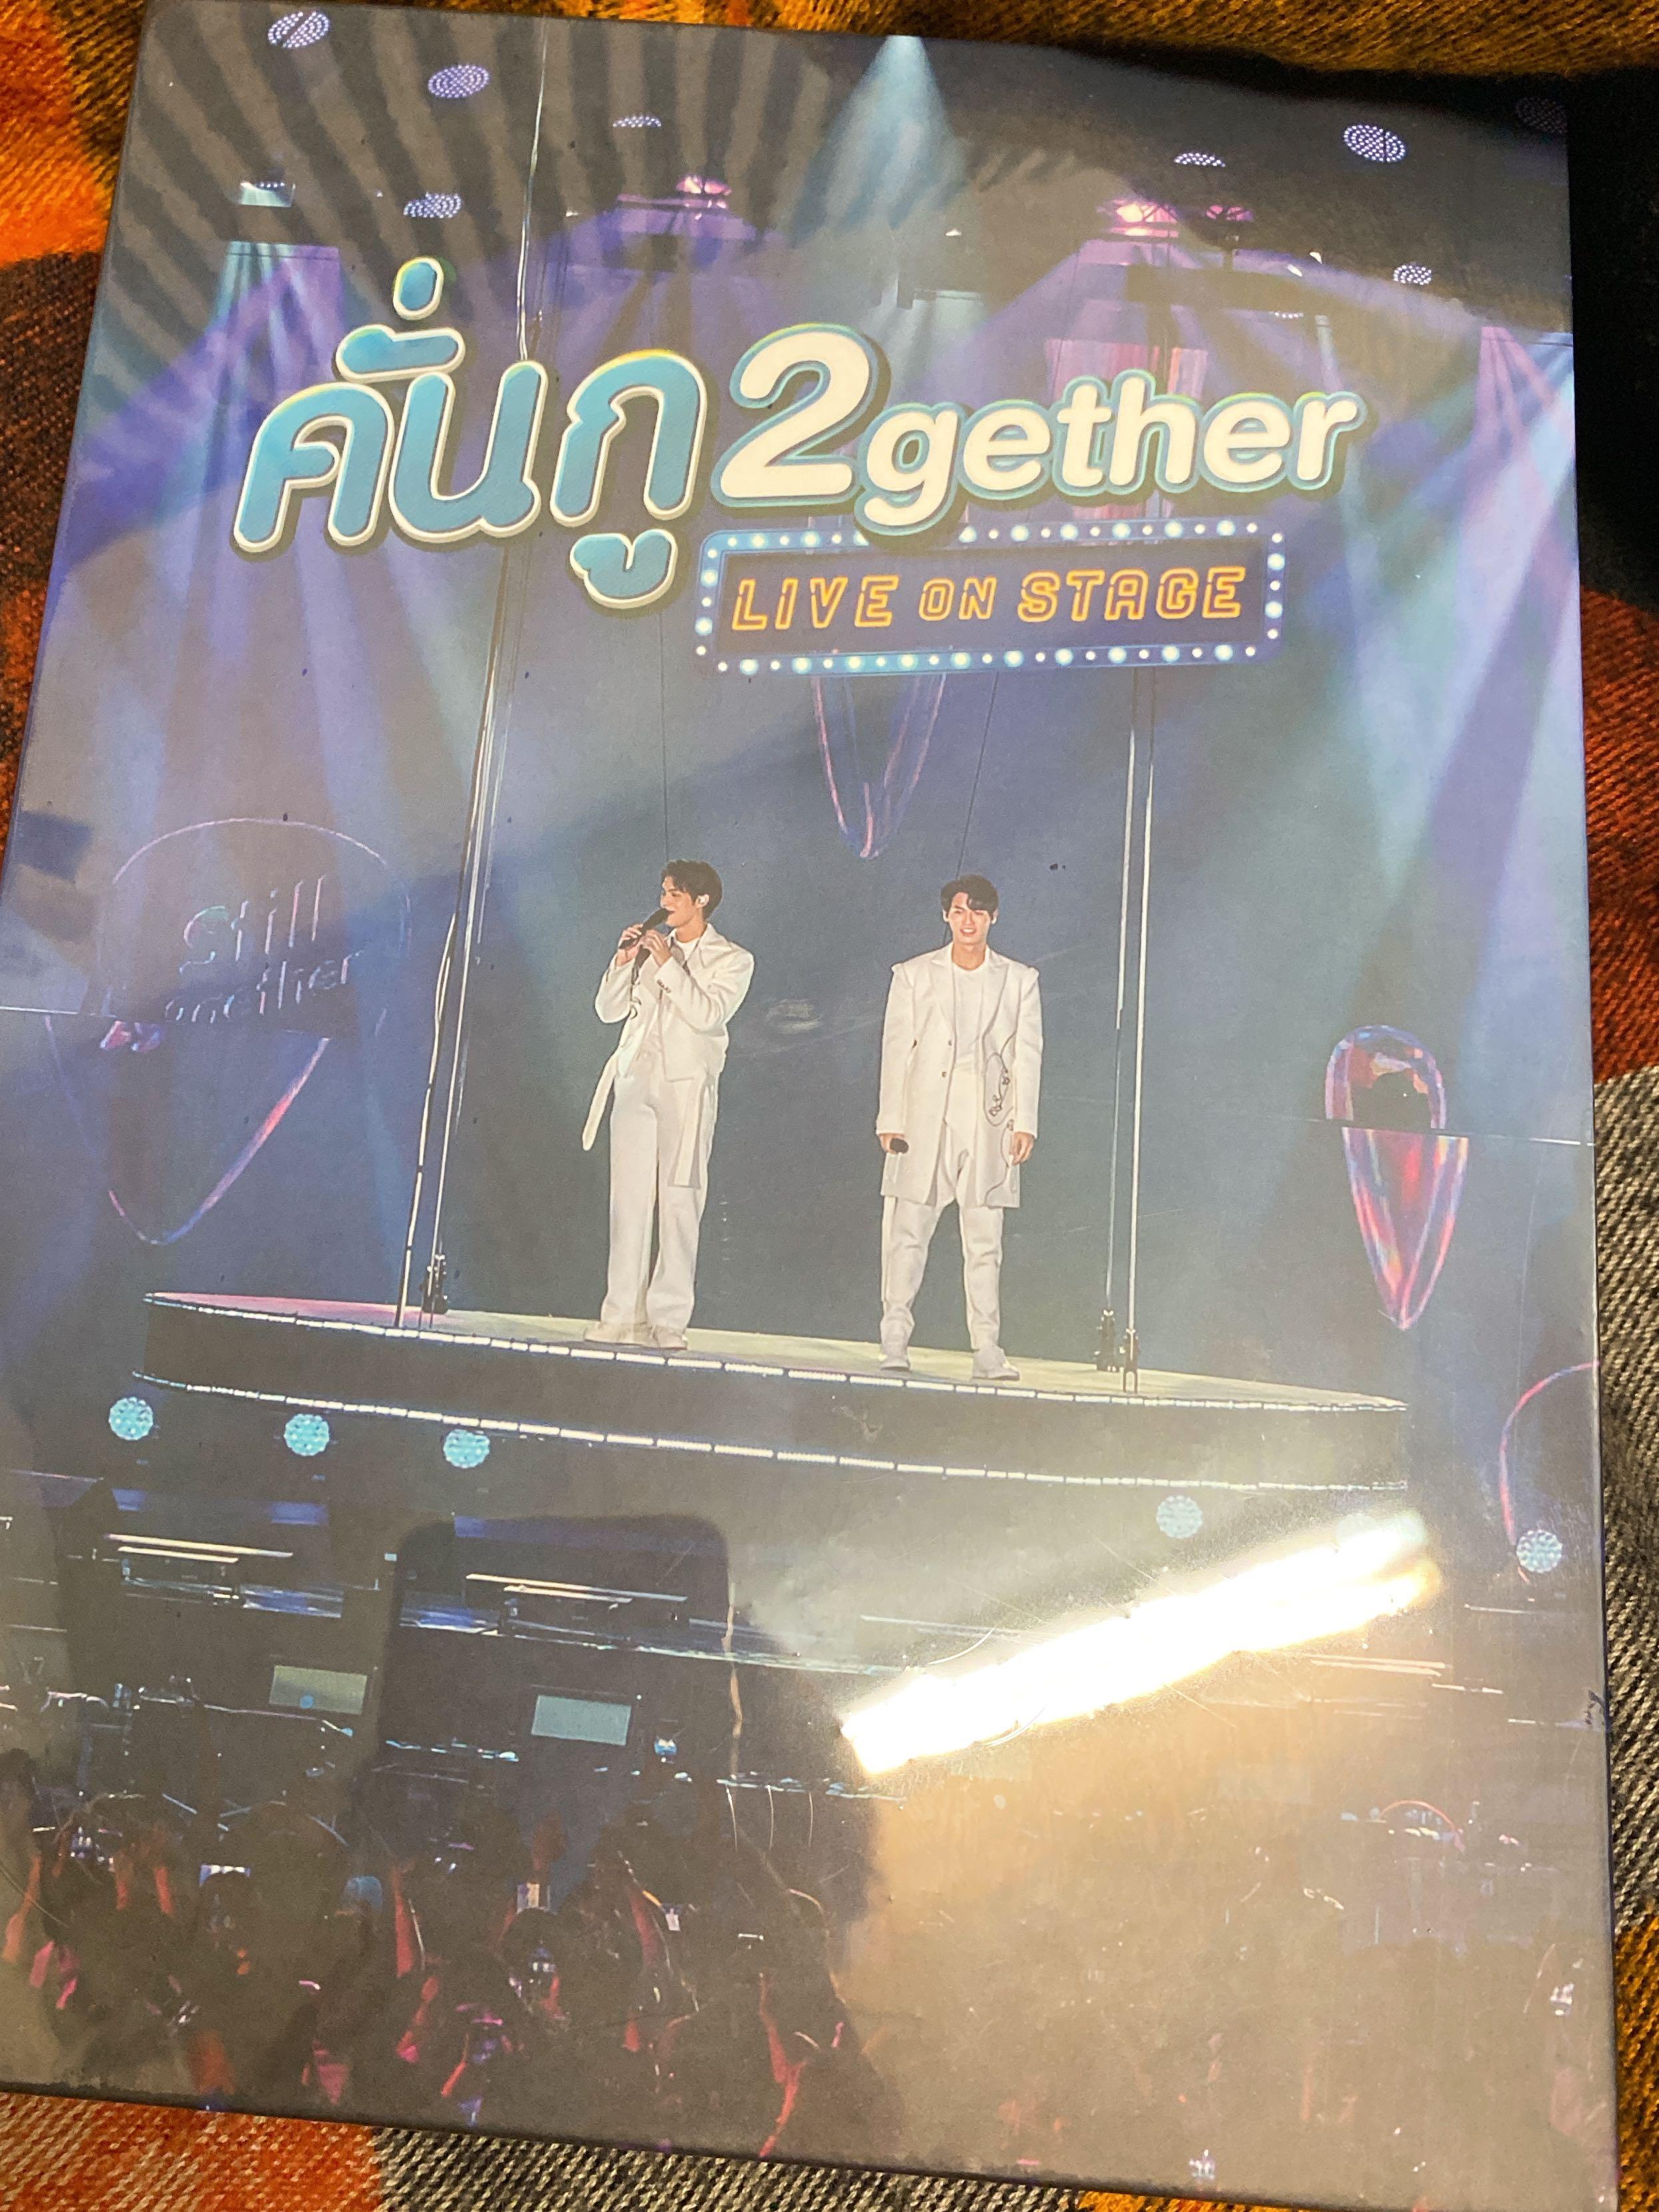 Brightwin2gether live on stage dvd box-